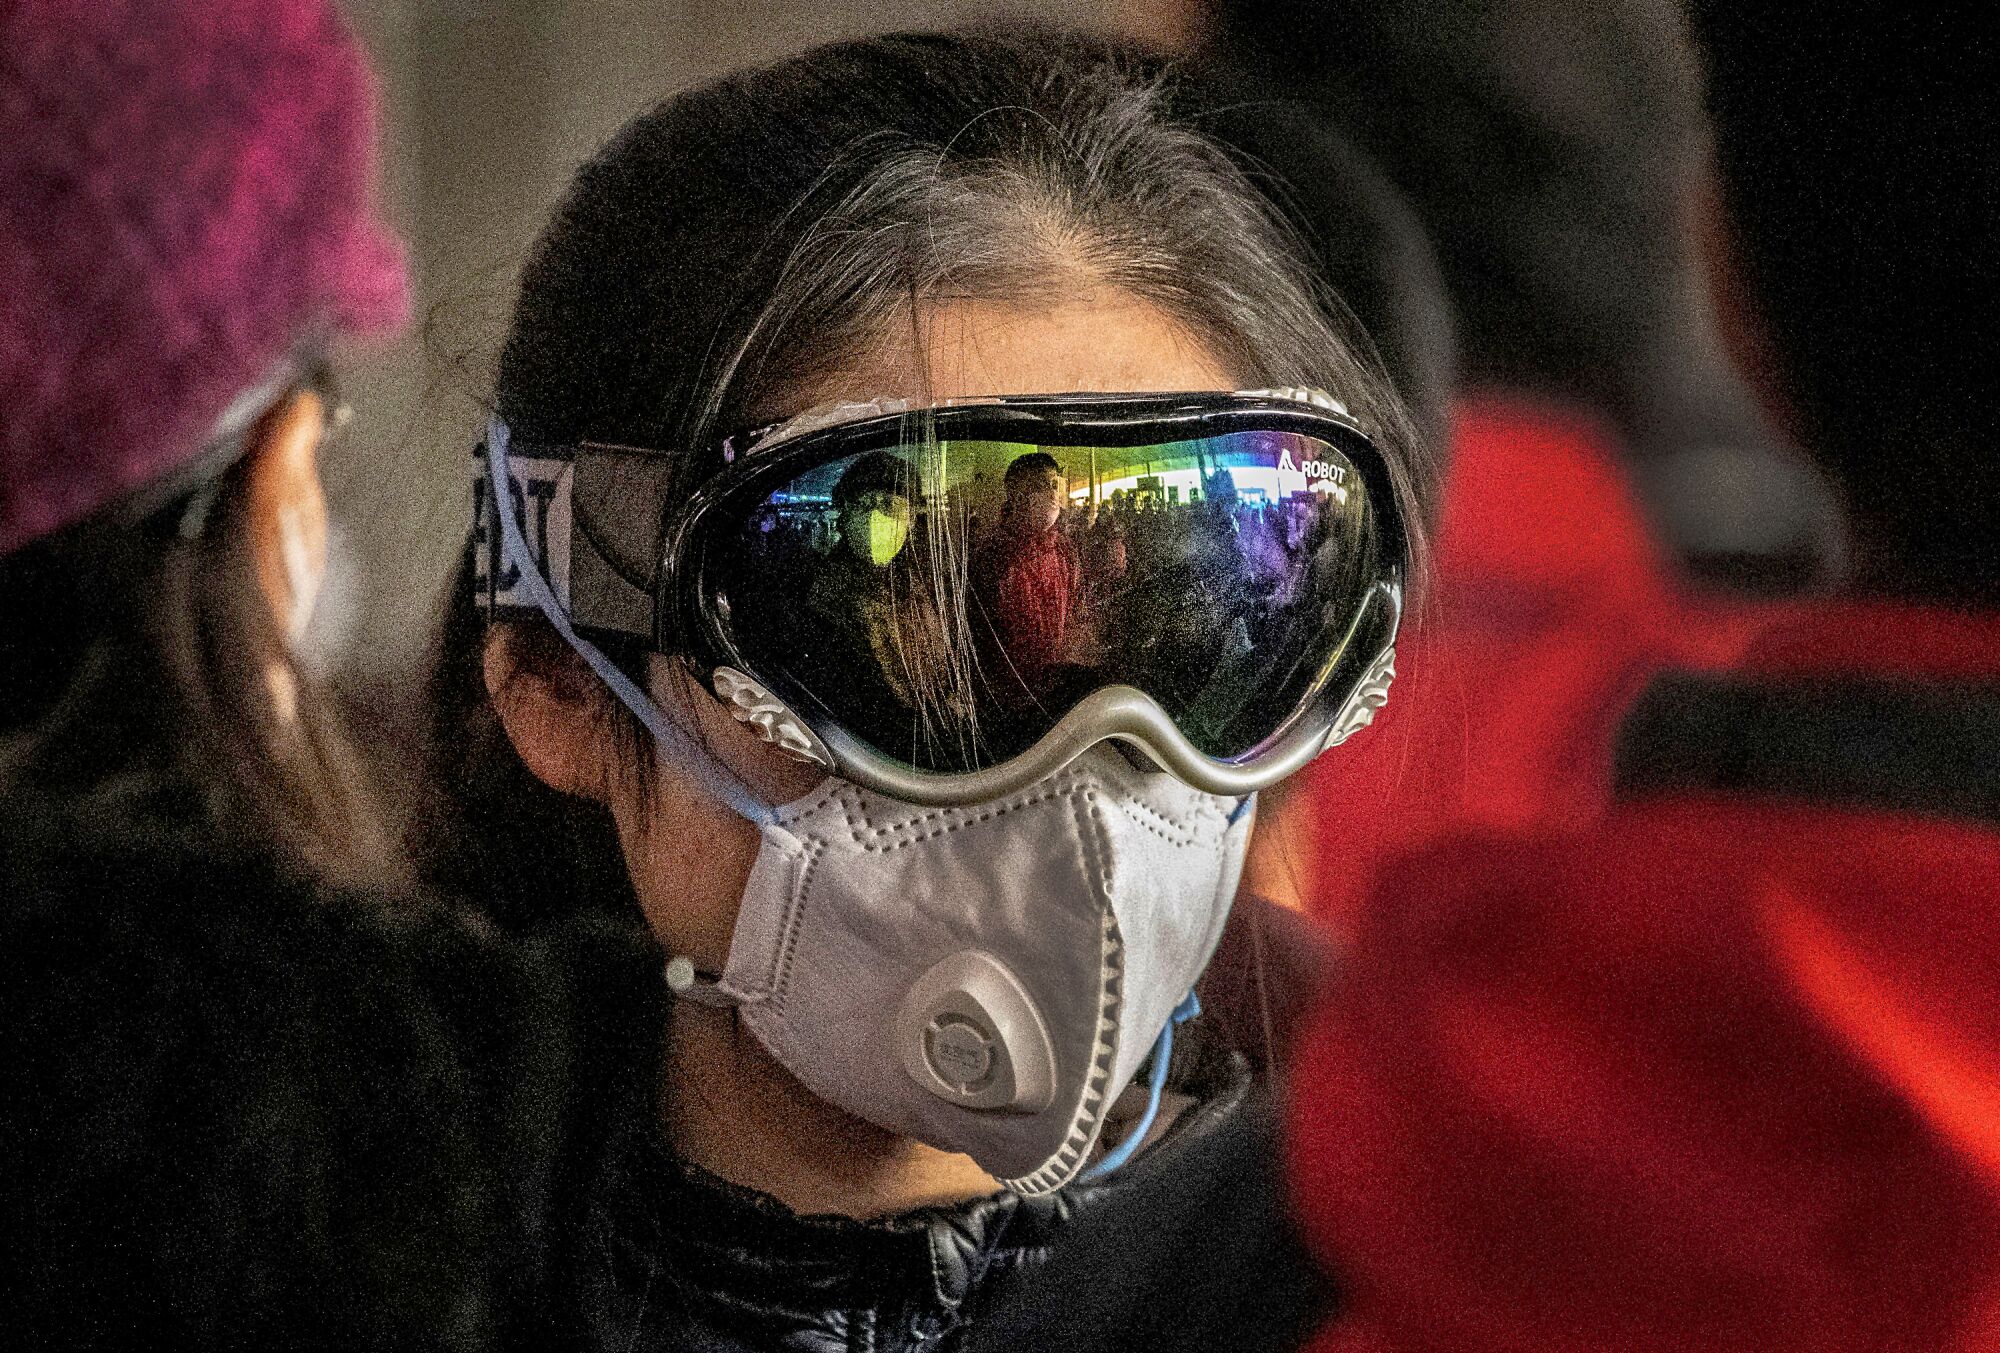 CHINA: A woman wears ski goggles and a protective mask as she checks in to a flight at Beijing Capital Airport.